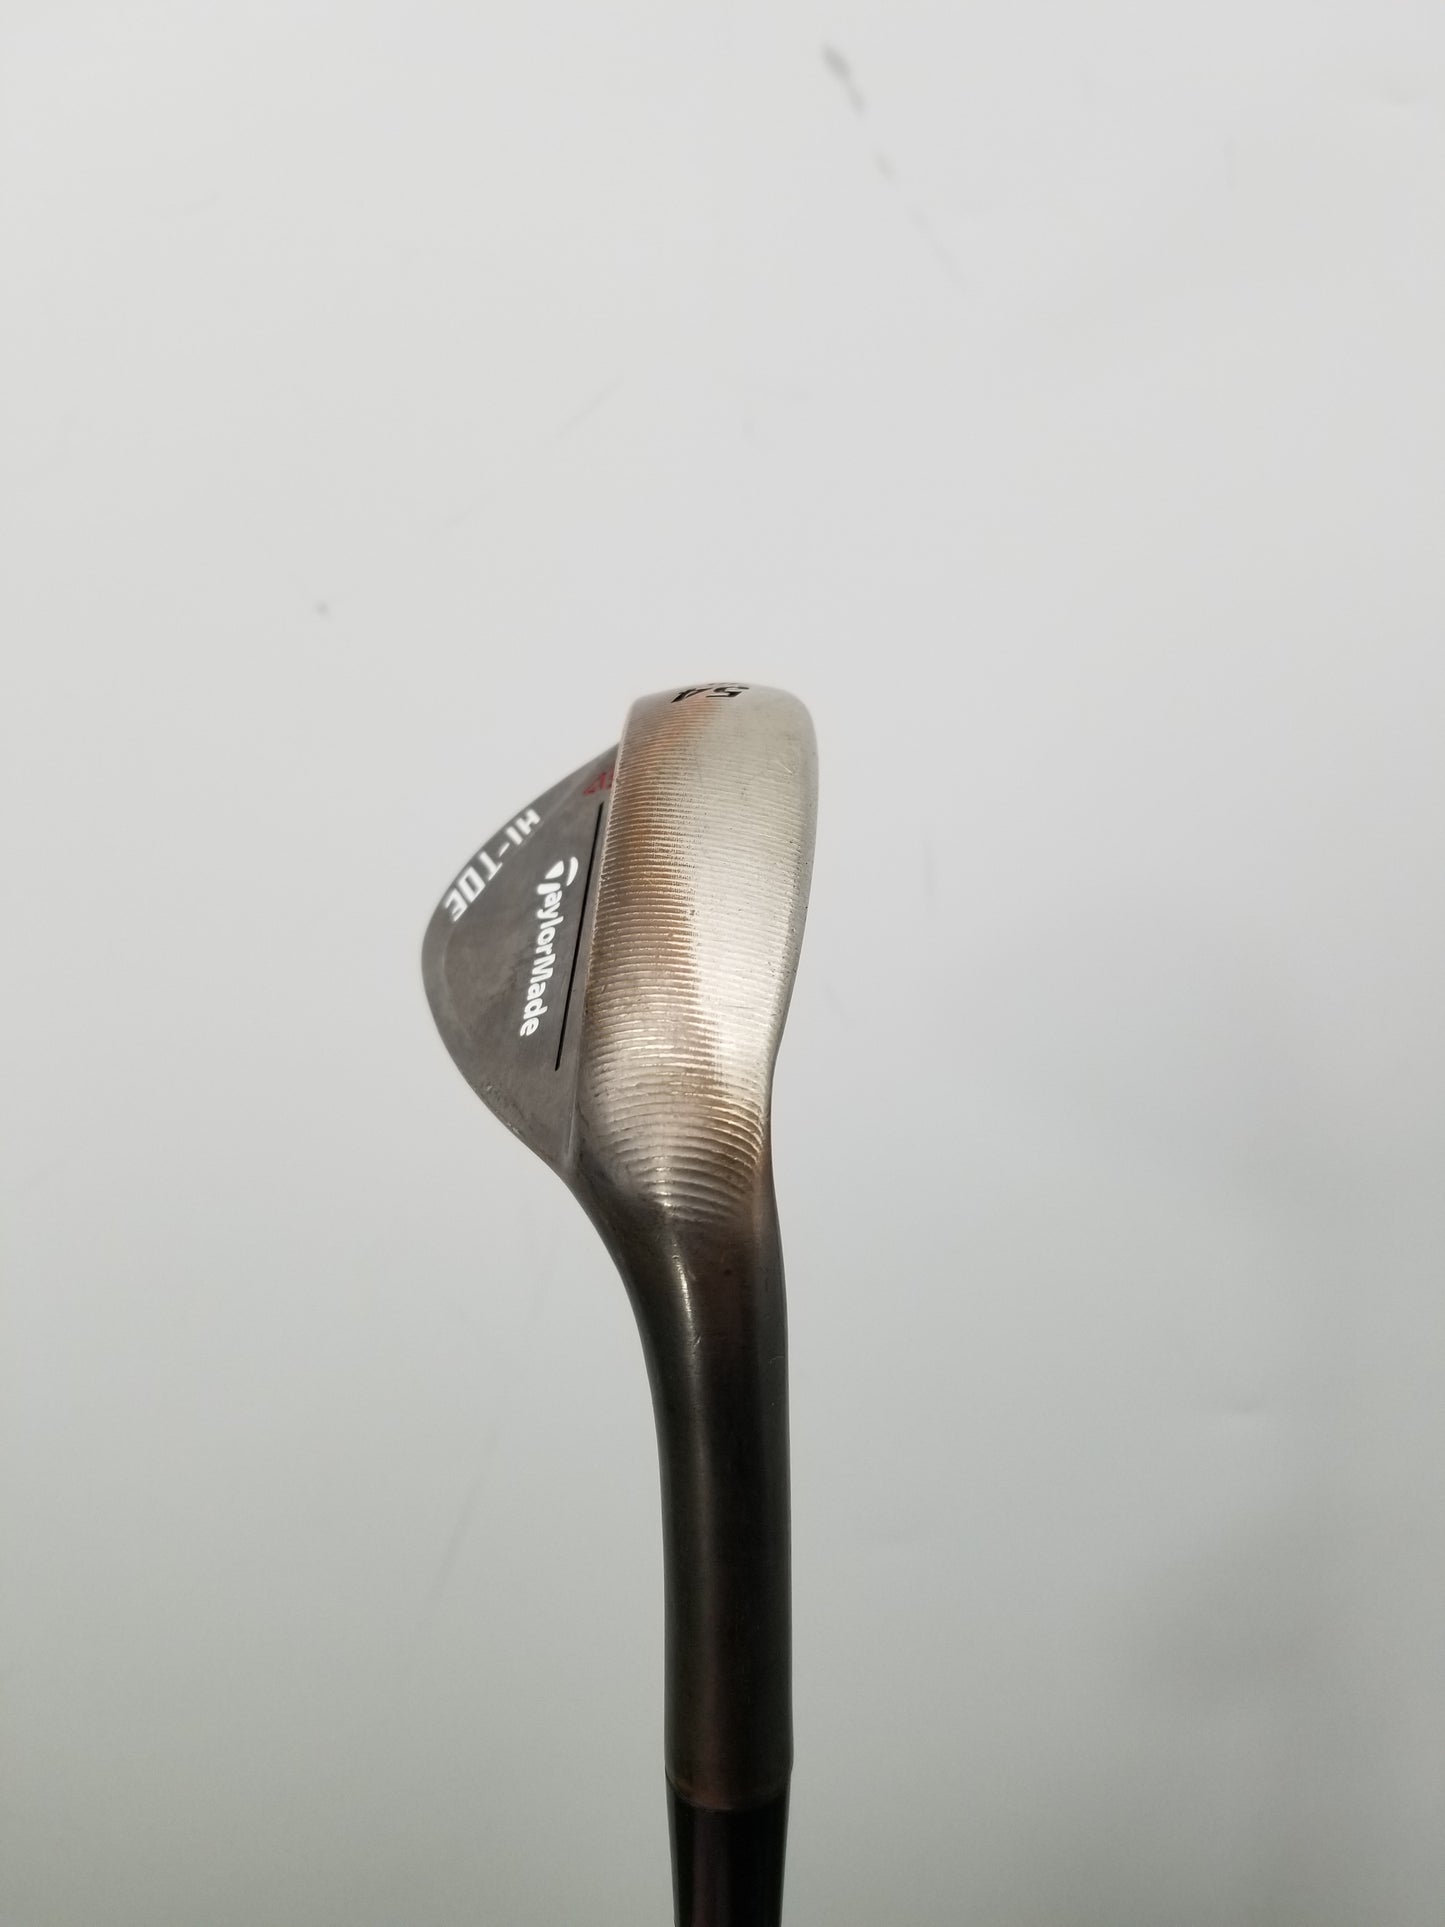 2018 TAYLORMADE MILLED GRIND HITOE WEDGE 54*/10 STIFF DYN.GOLD TI S400 35" GOOD